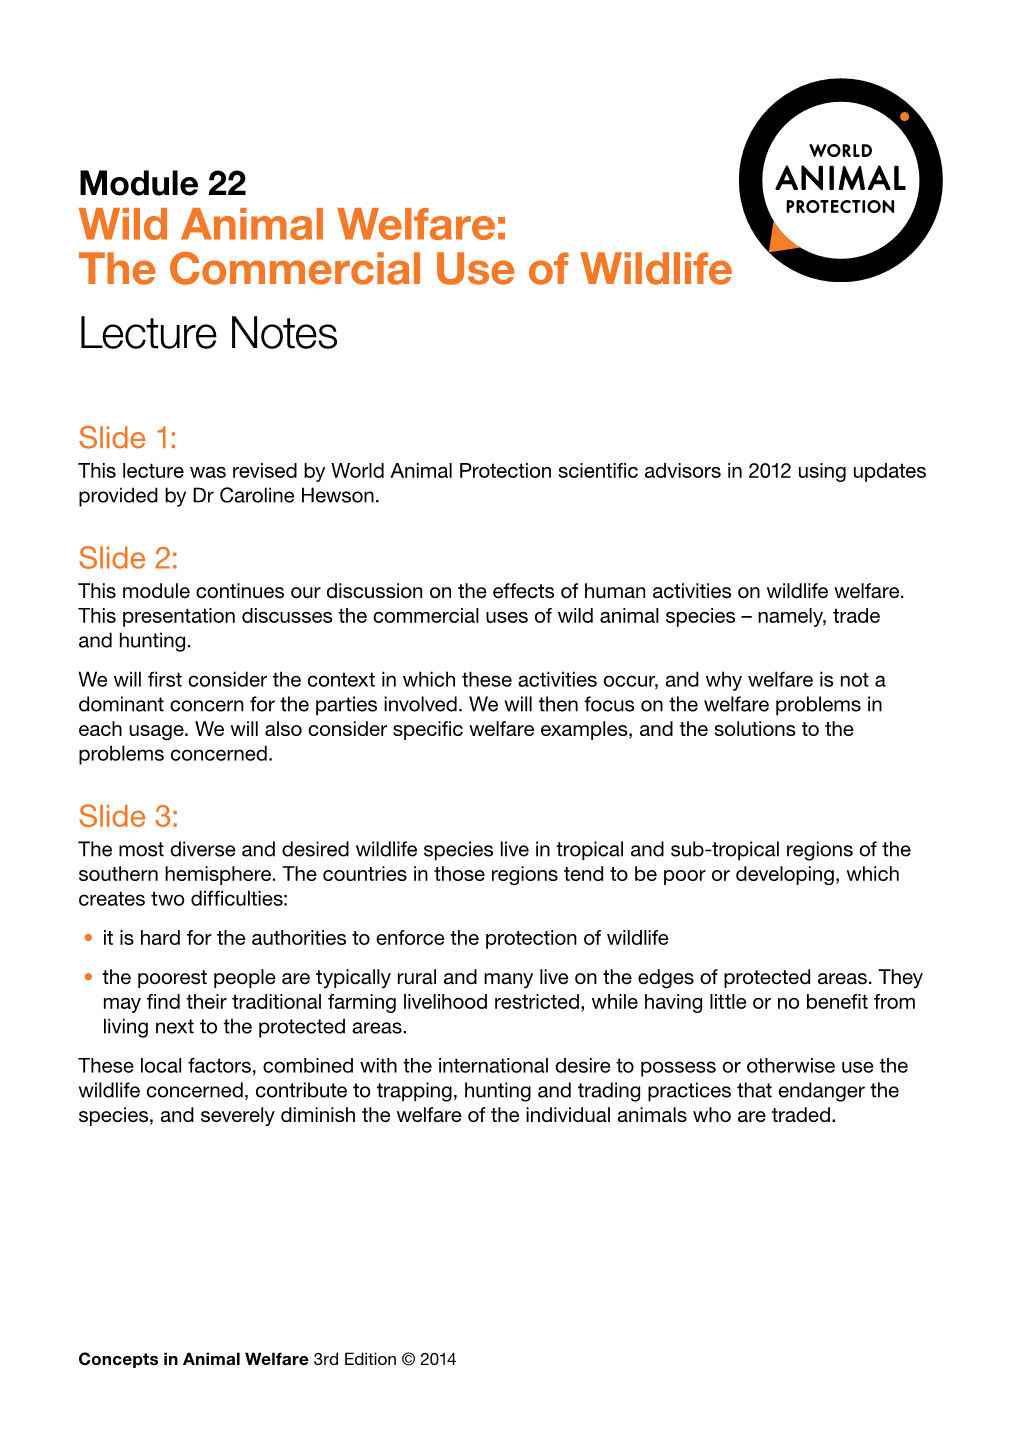 Wild Animal Welfare: the Commercial Use of Wildlife Lecture Notes